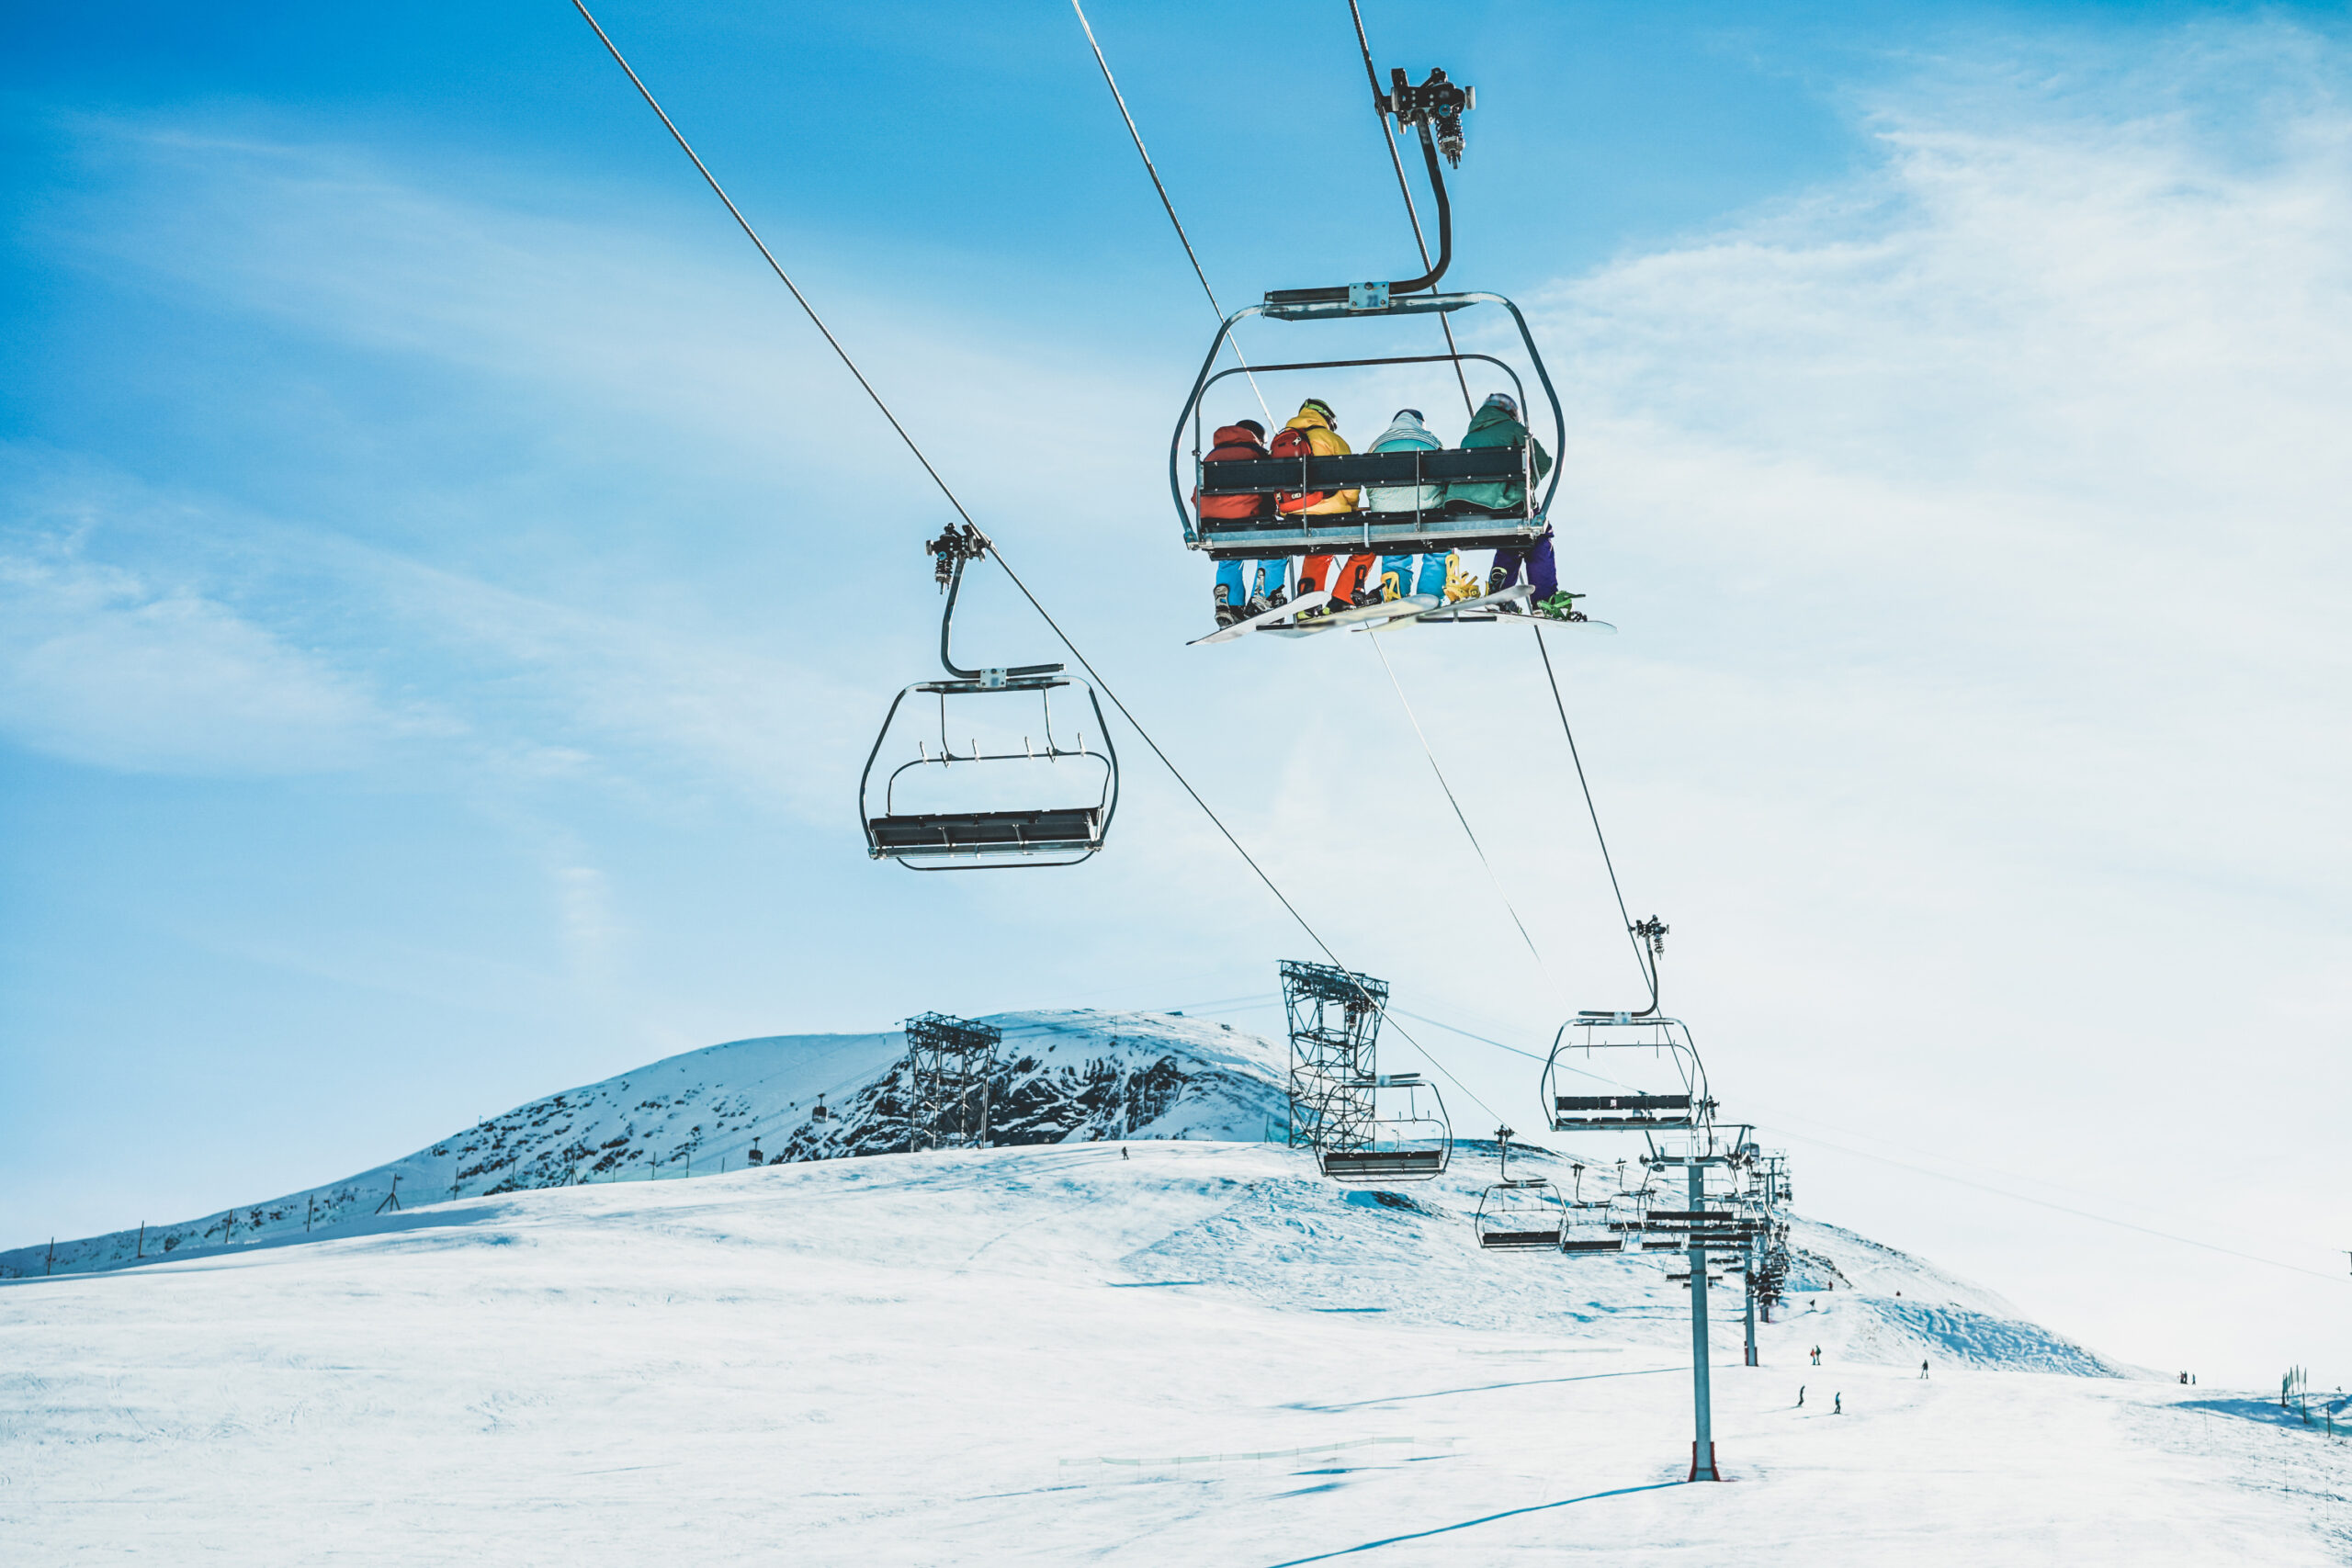 People on ski lift in winter ski resort - Holidays, snow gear renting, skiing, snowboarding and mountain landscape 